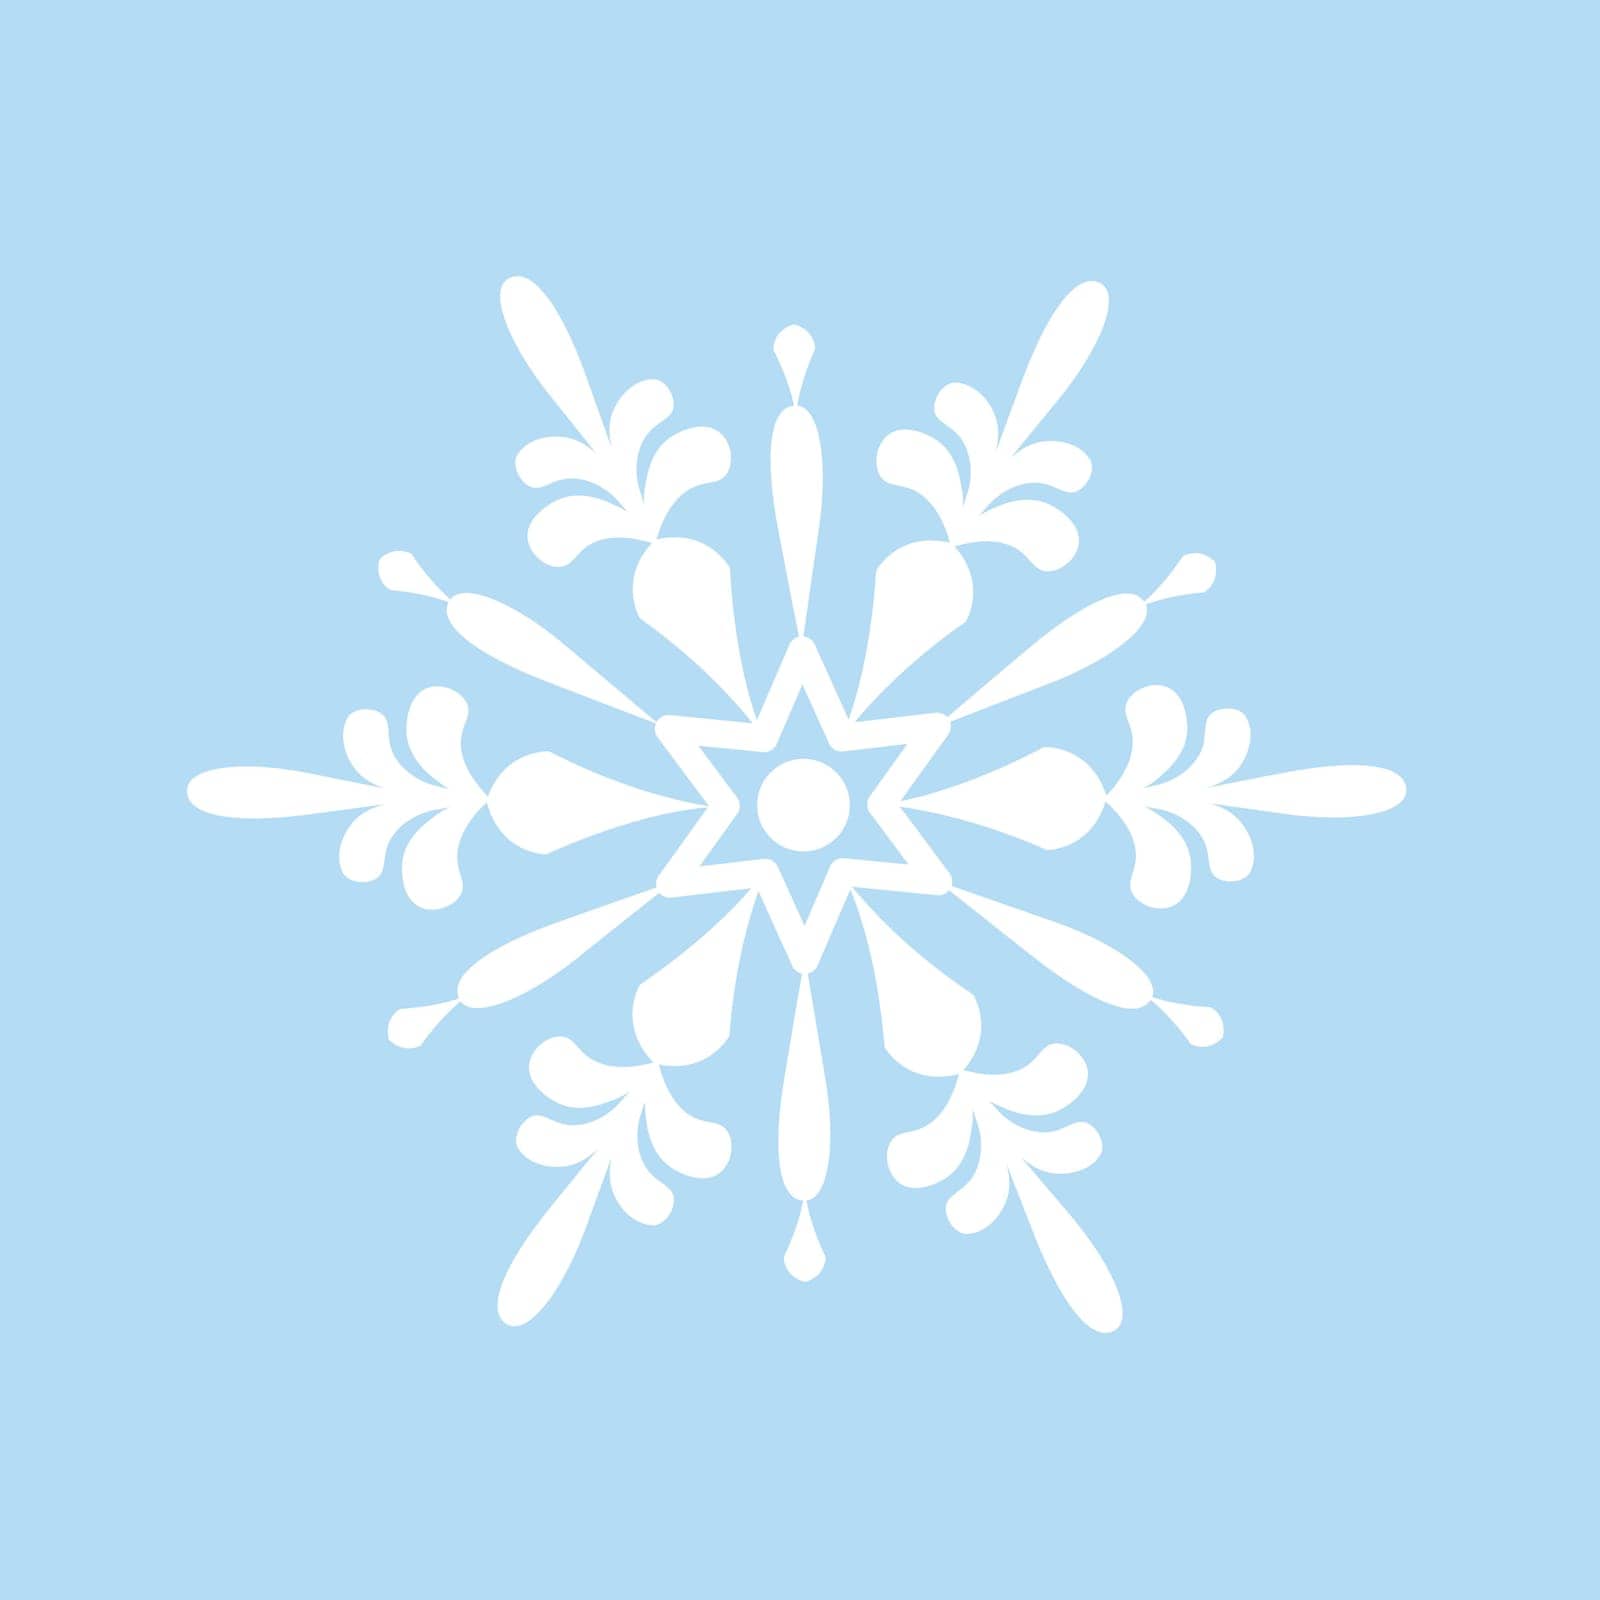 Snowflake. Beautiful snowflake in cartoon style. A white snowflake on a blue background. Winter Christmas illustration. Vector.